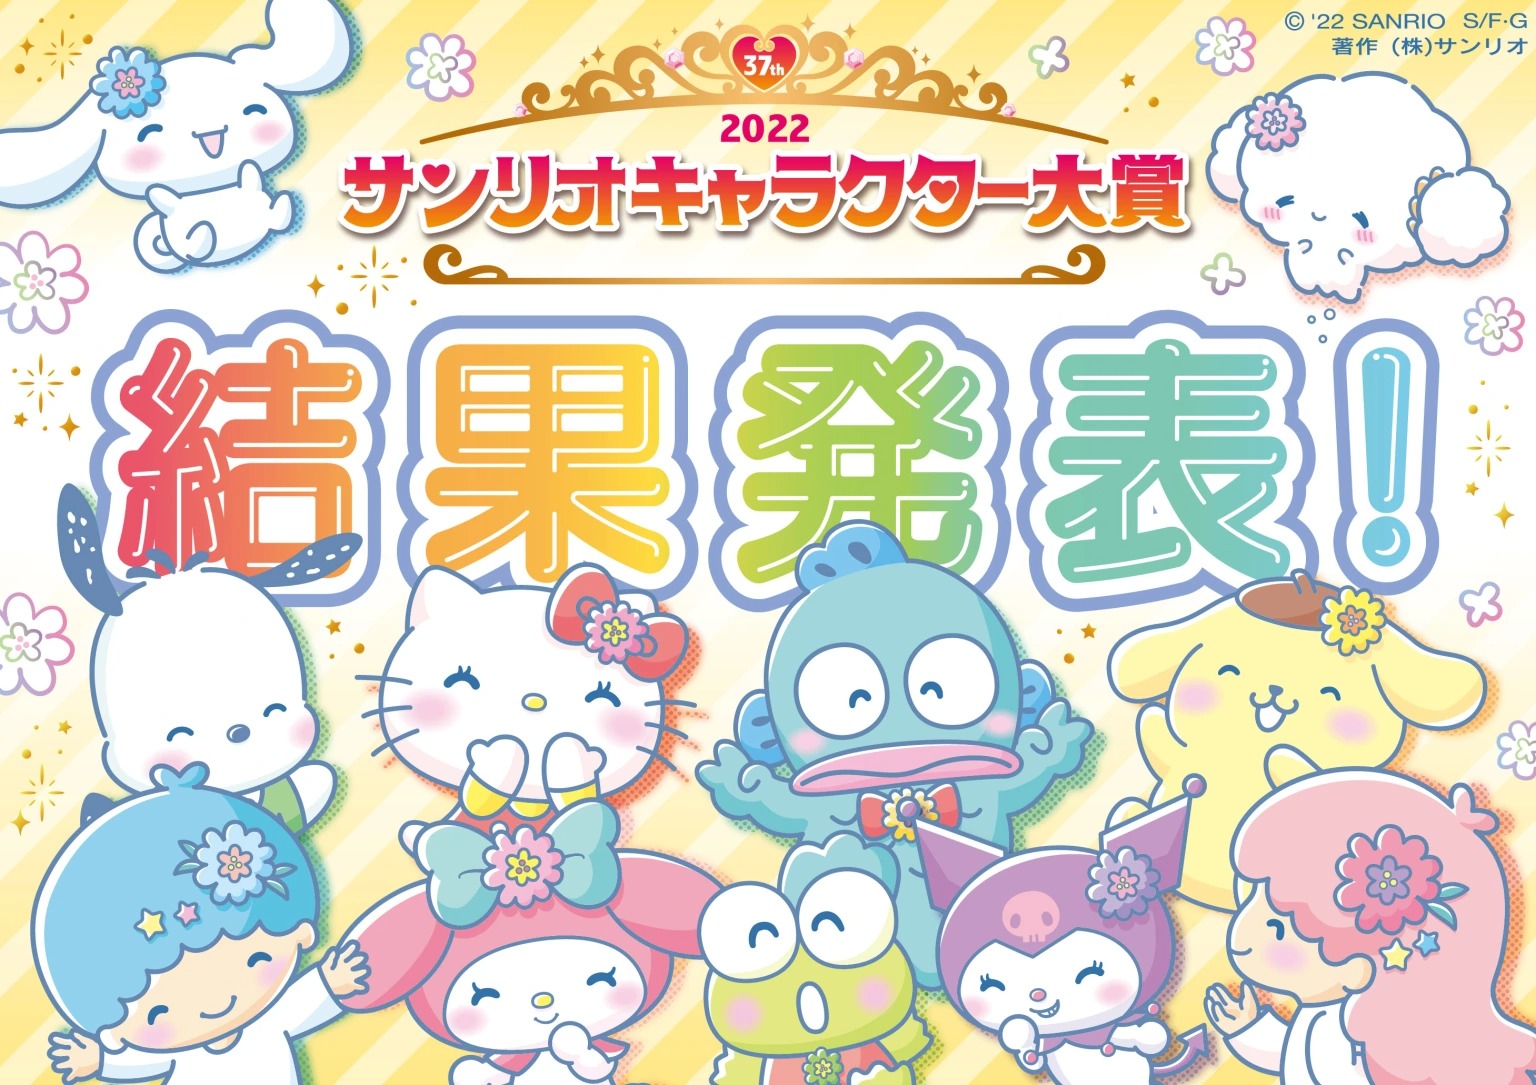 My Melody】Ranked 6th in the popularity vote! What kind of character is the  cute My Melody, who had her own anime series in Japan?